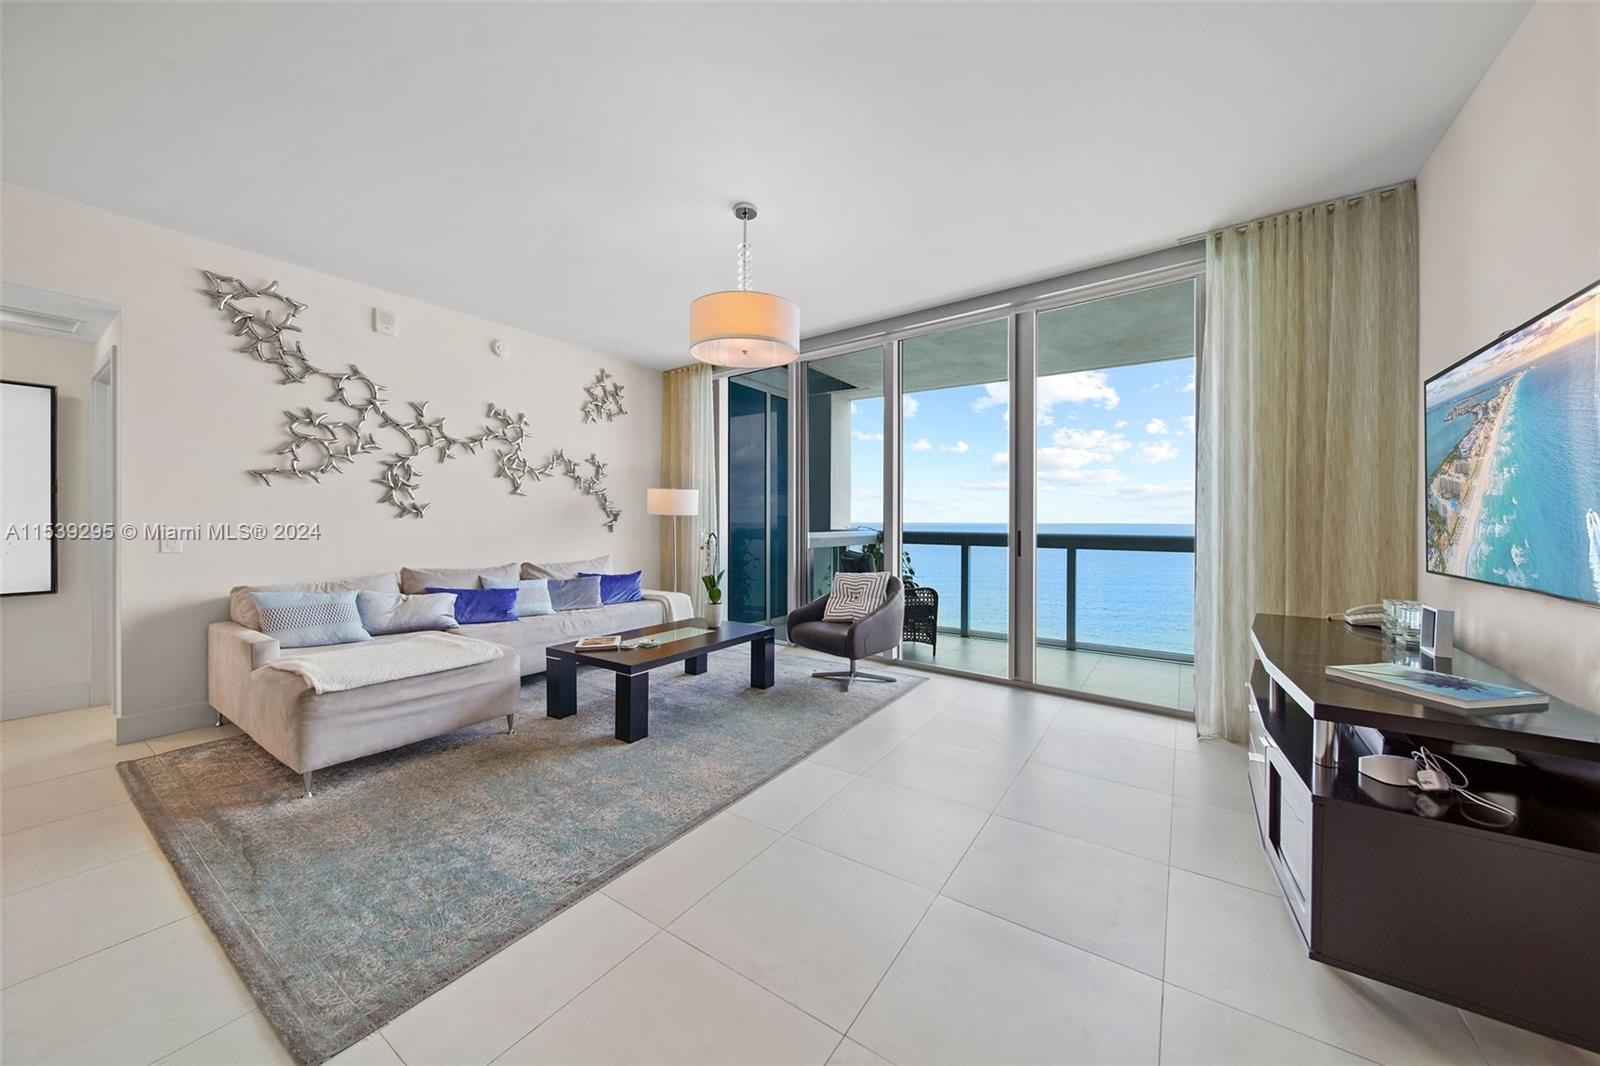 Listing Image 6899 Collins Ave #1801